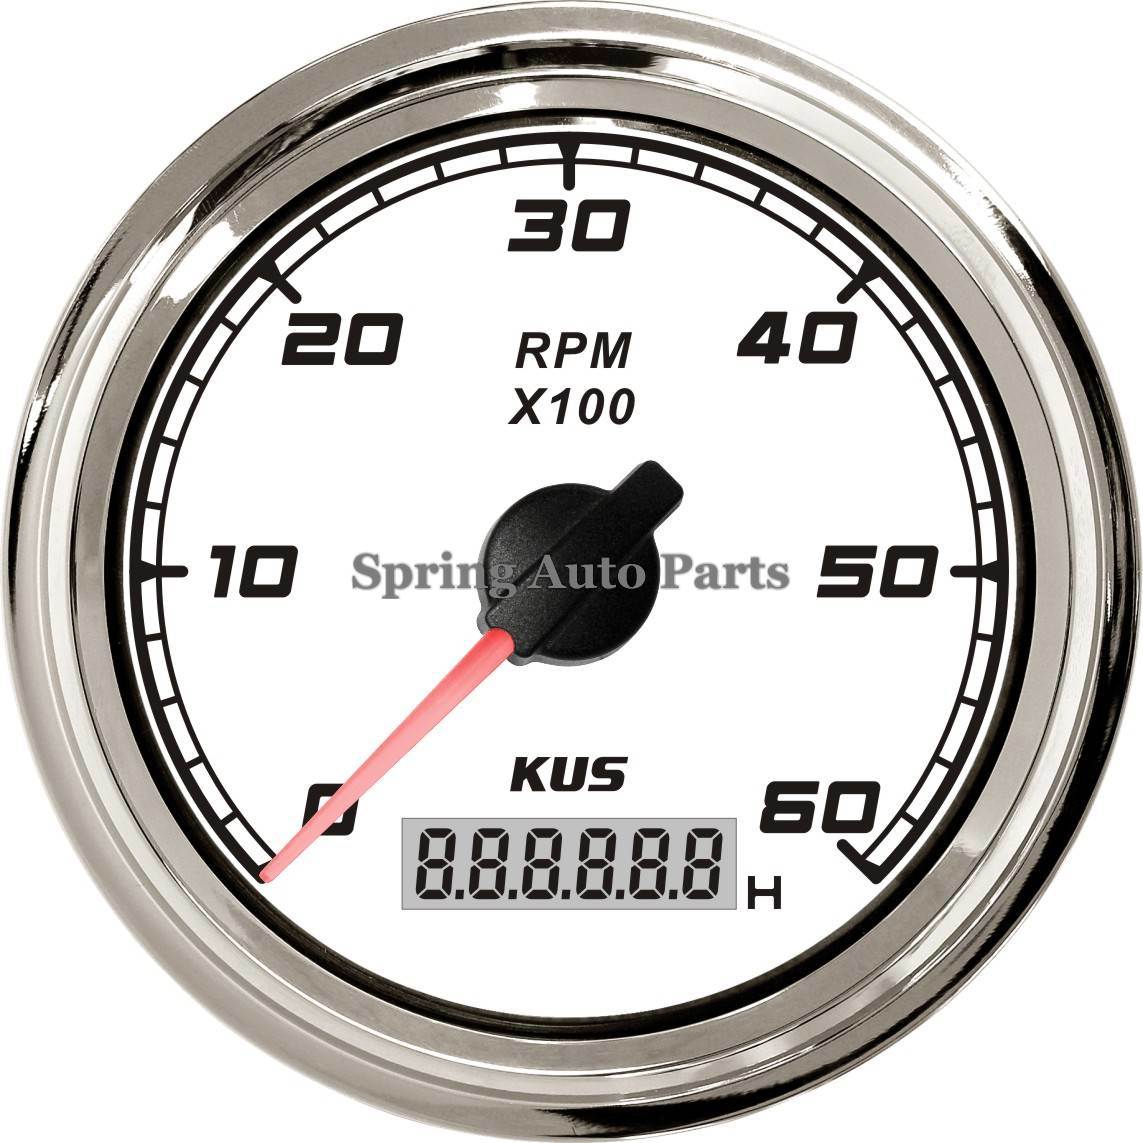 Sq 85mm Tachometer 6000rpm for All Engines